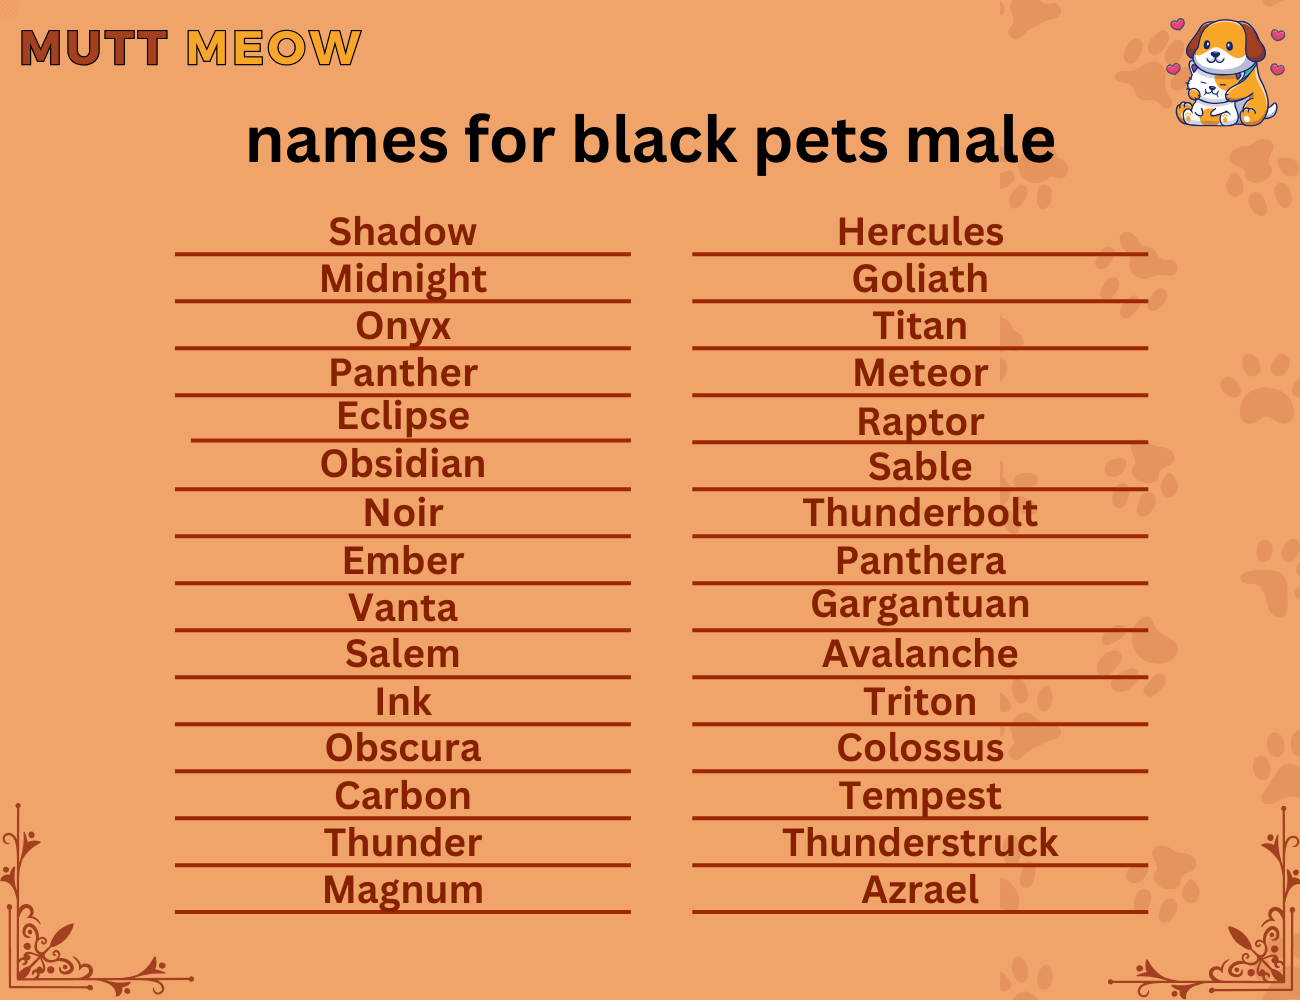 names for black pets male